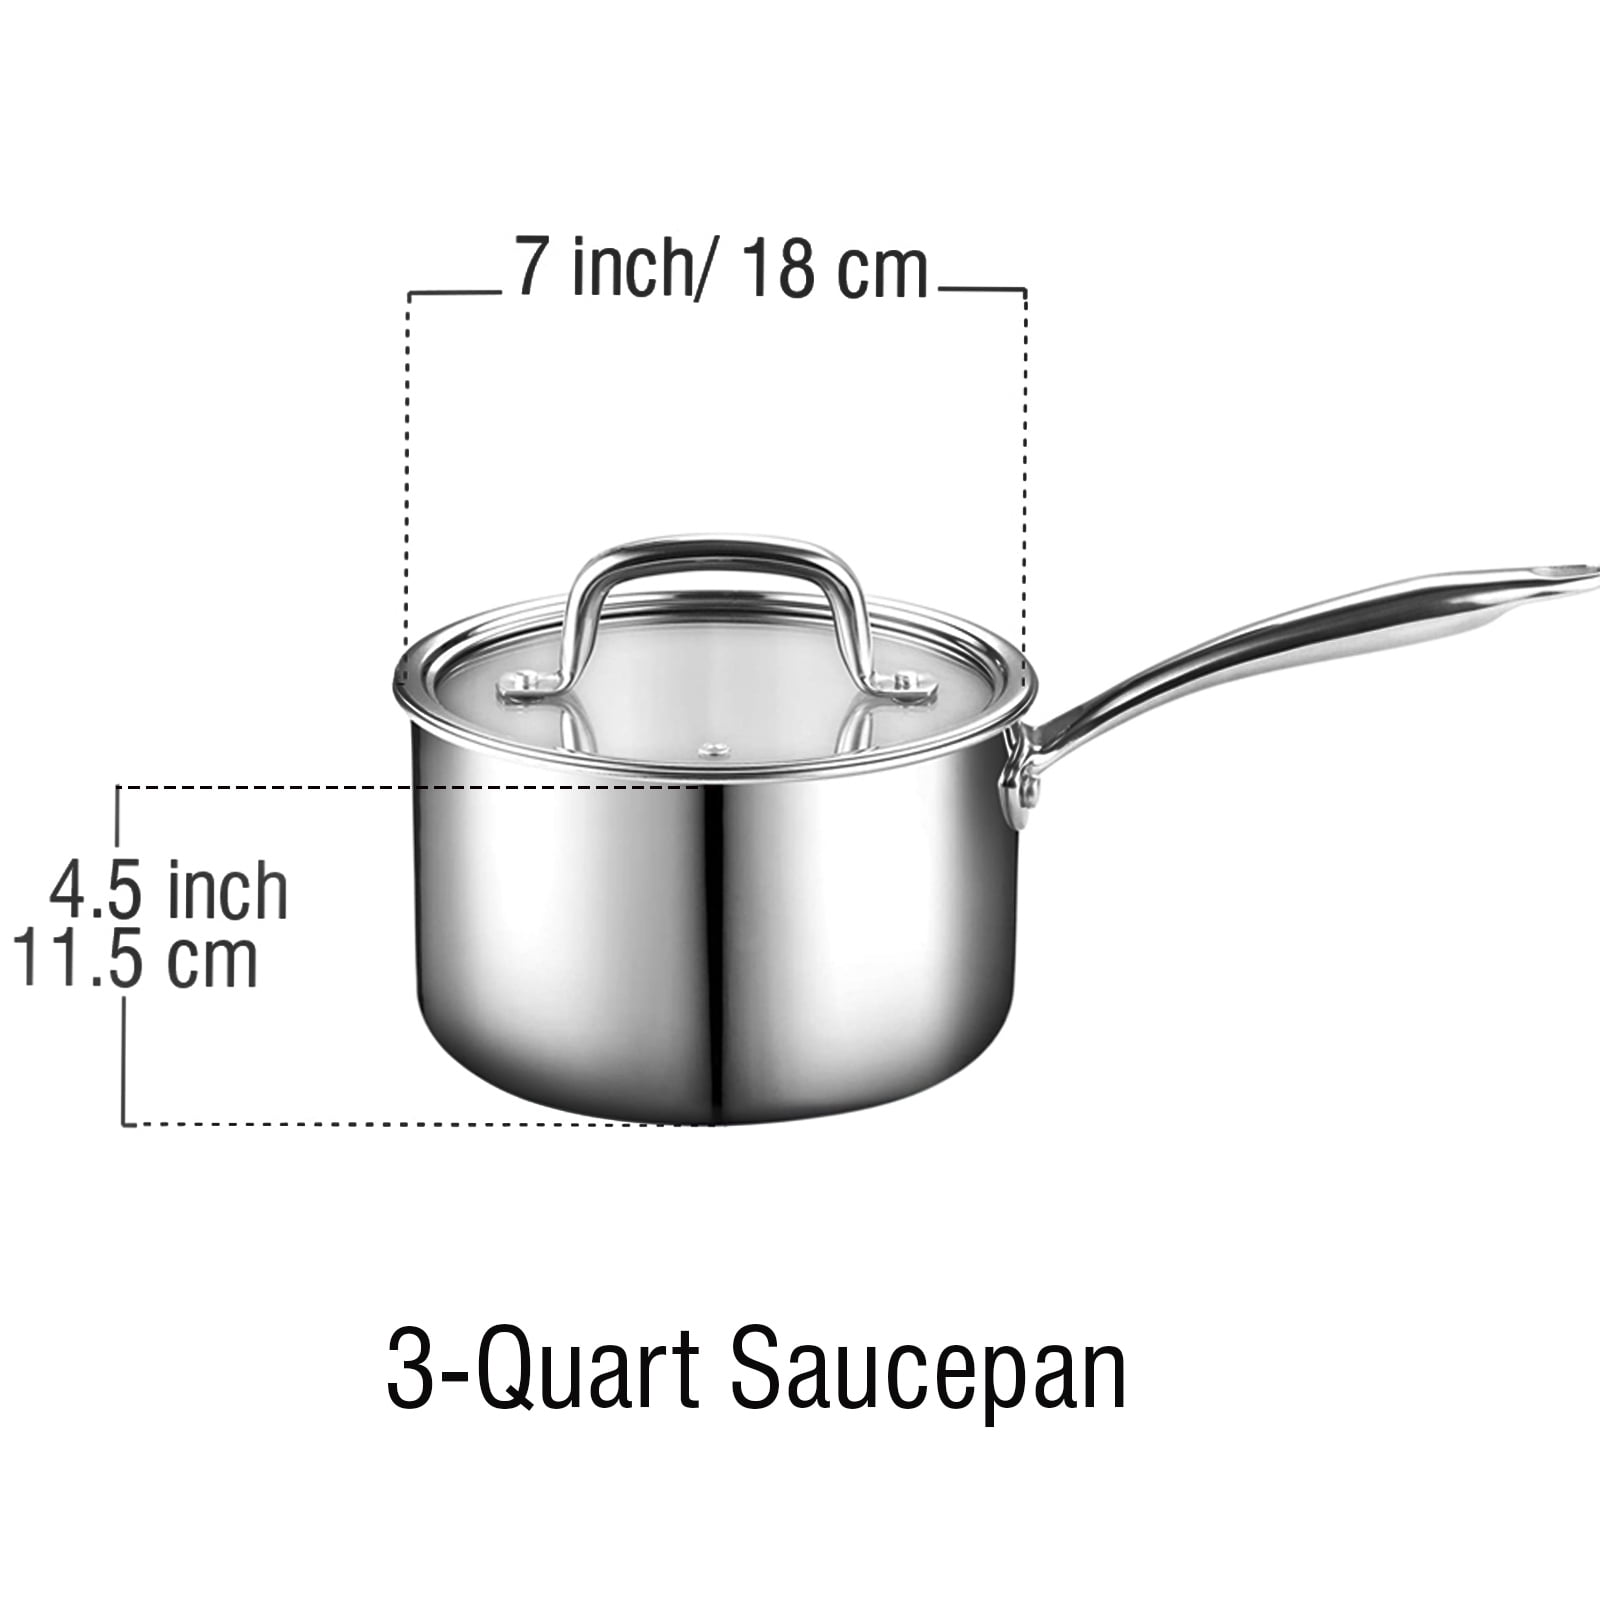 Cook N Home Saucepan Sauce Pot with Lid 1 Quart Stainless Steel , Stay